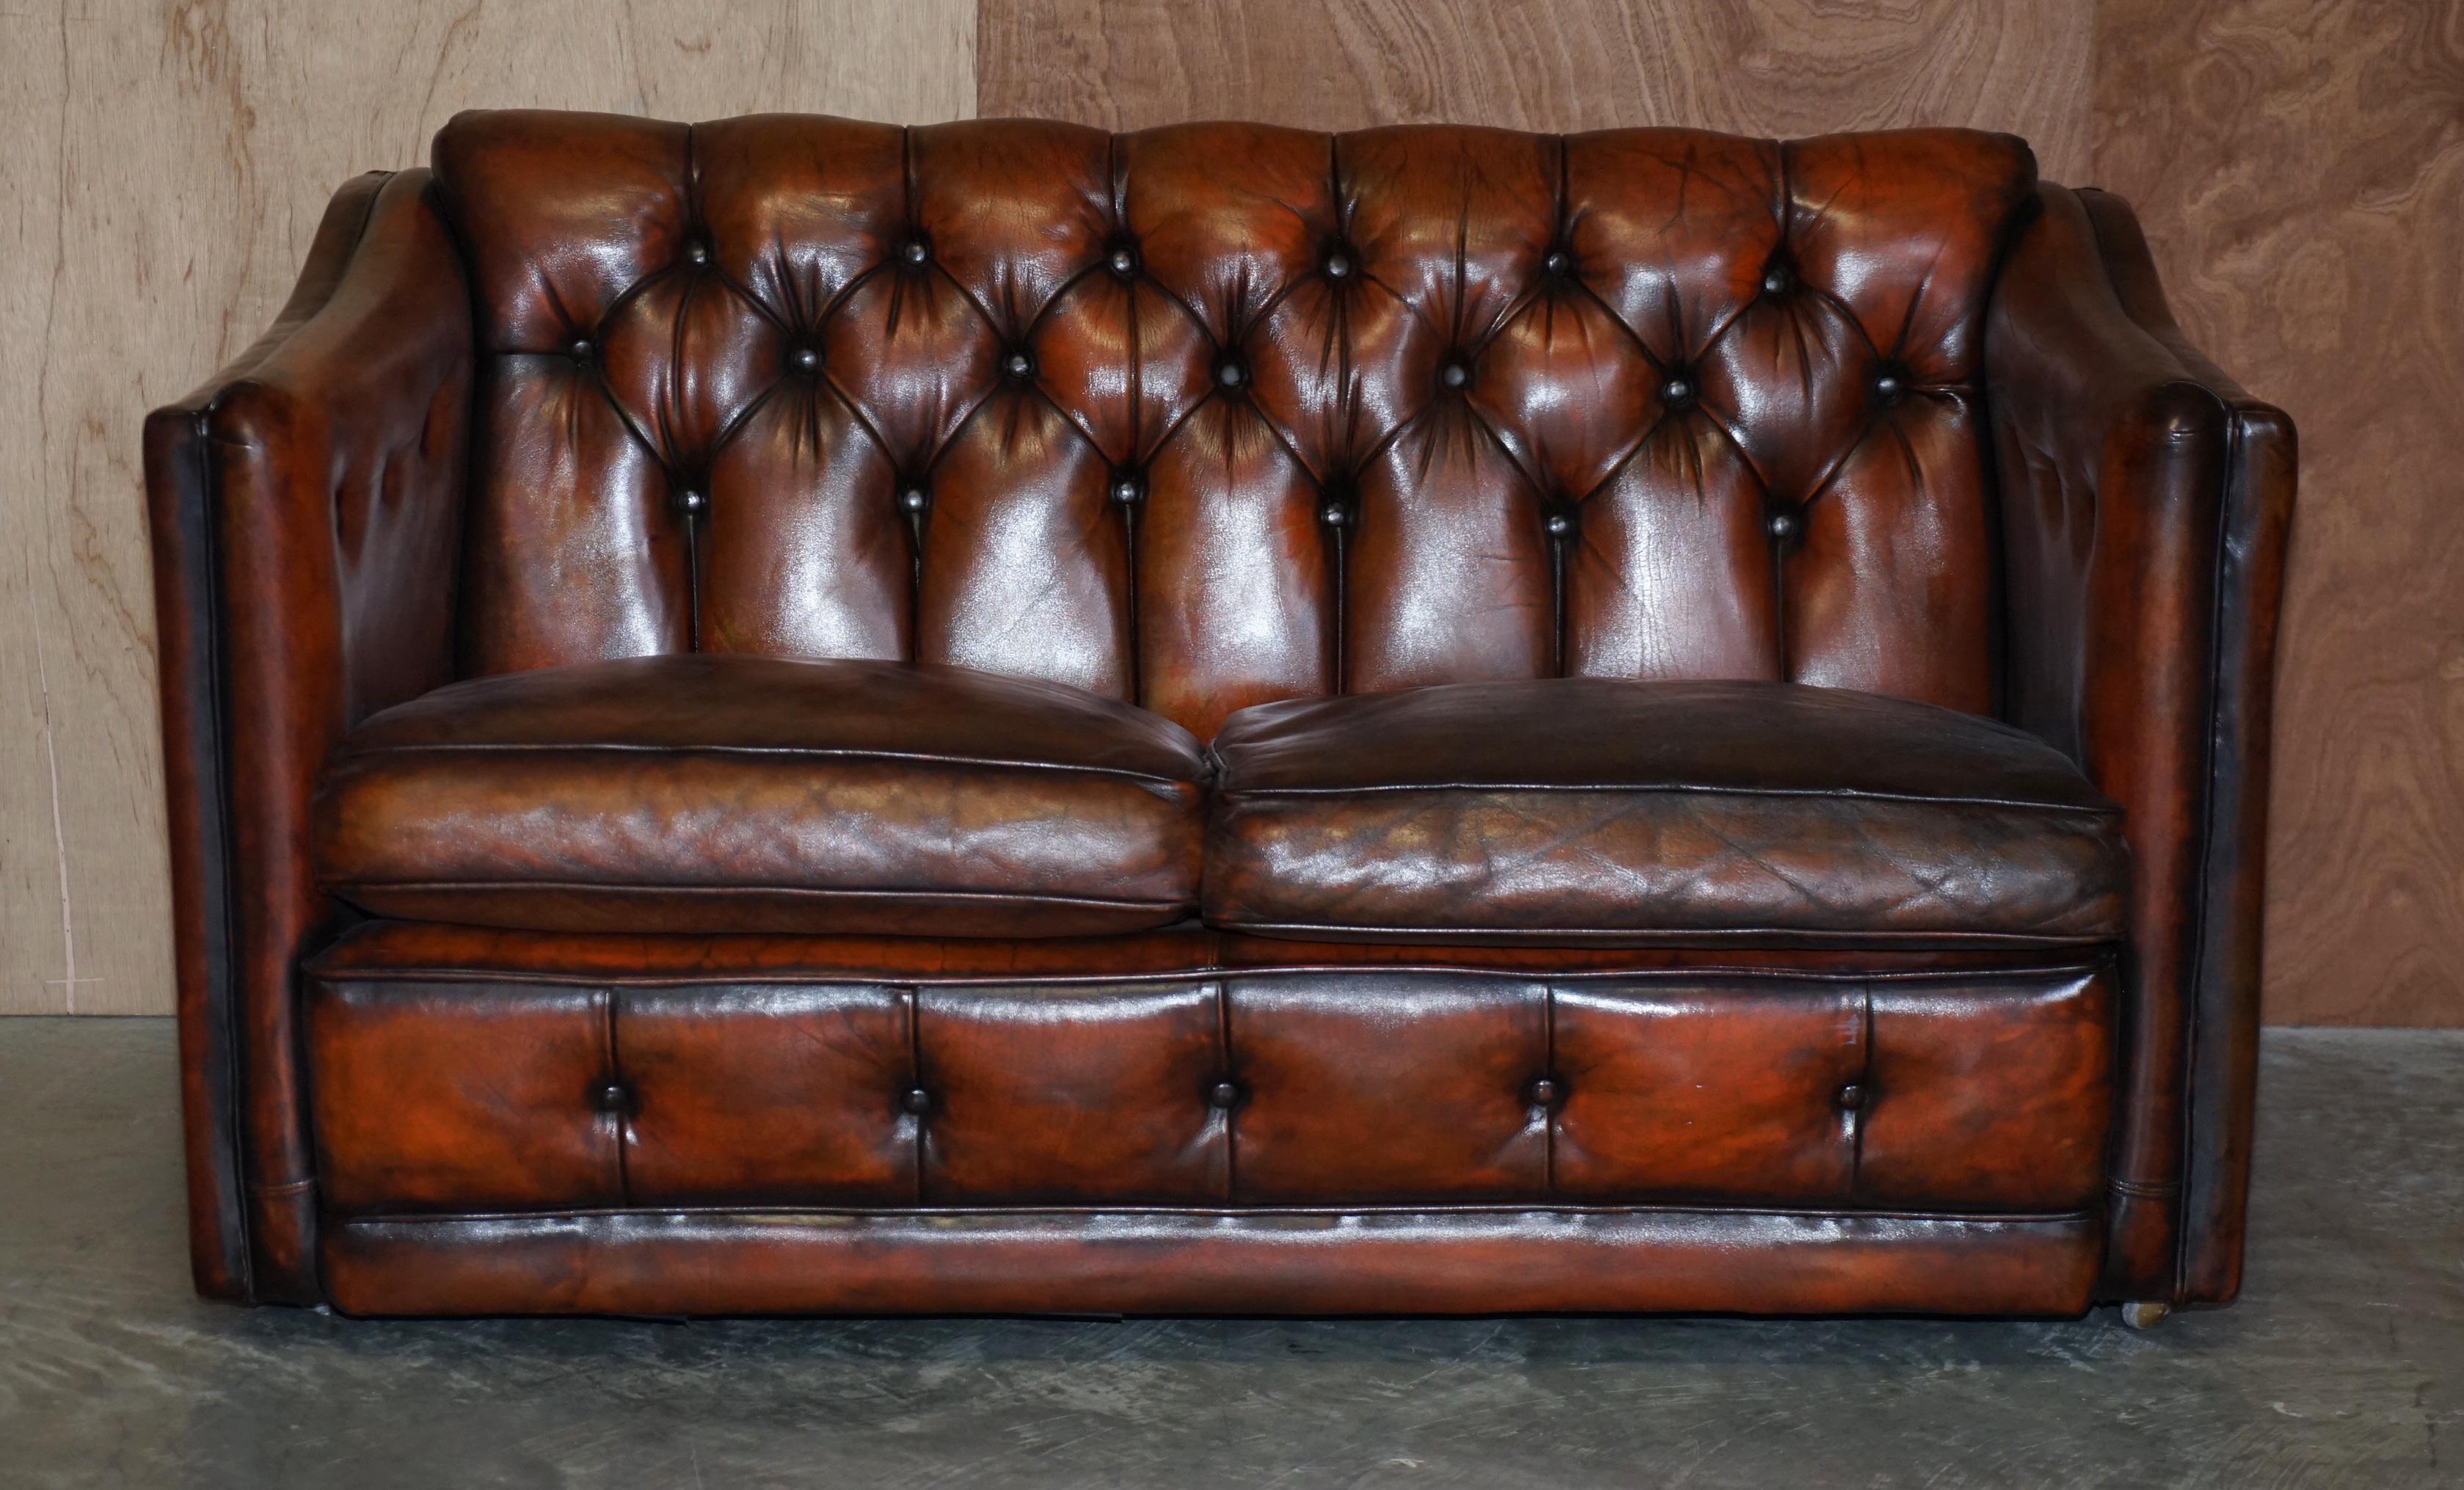 We are delighted to offer this exquisite original circa 1920’s Art Deco fully restored Chesterfield club sofa which is part of a suite

This sofa is very stylish, it has those Metropolitan lines which we saw in Art Deco New York Skyscrapers, its